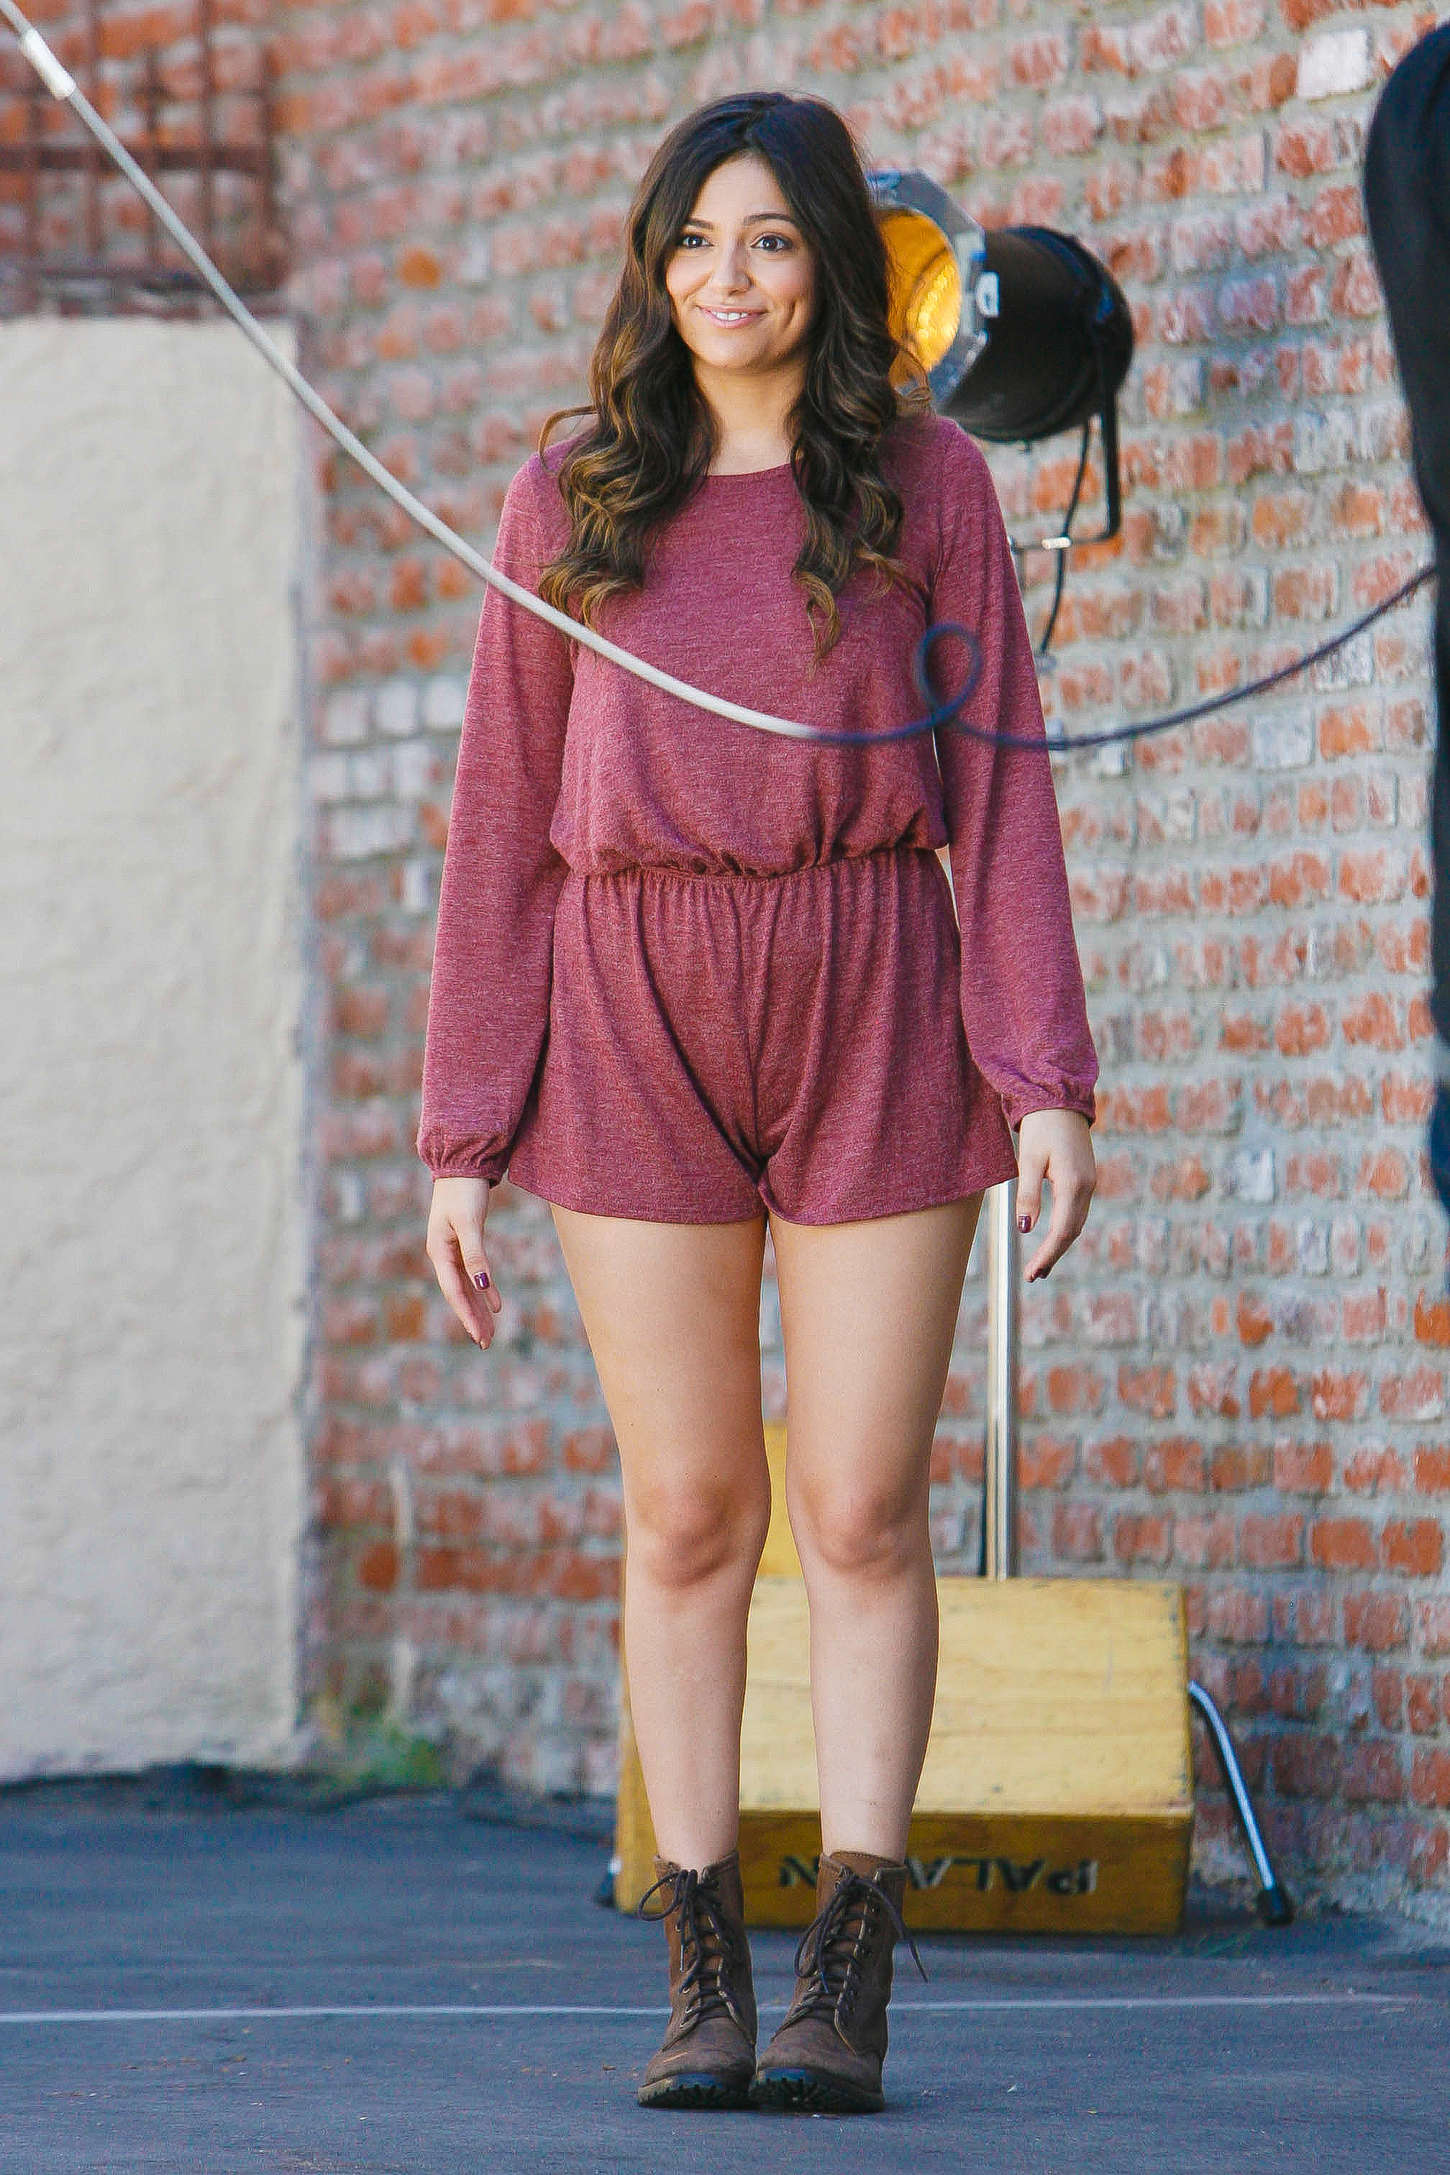 Bethany Mota - Filming a DWTS Promotion in Hollywood. 